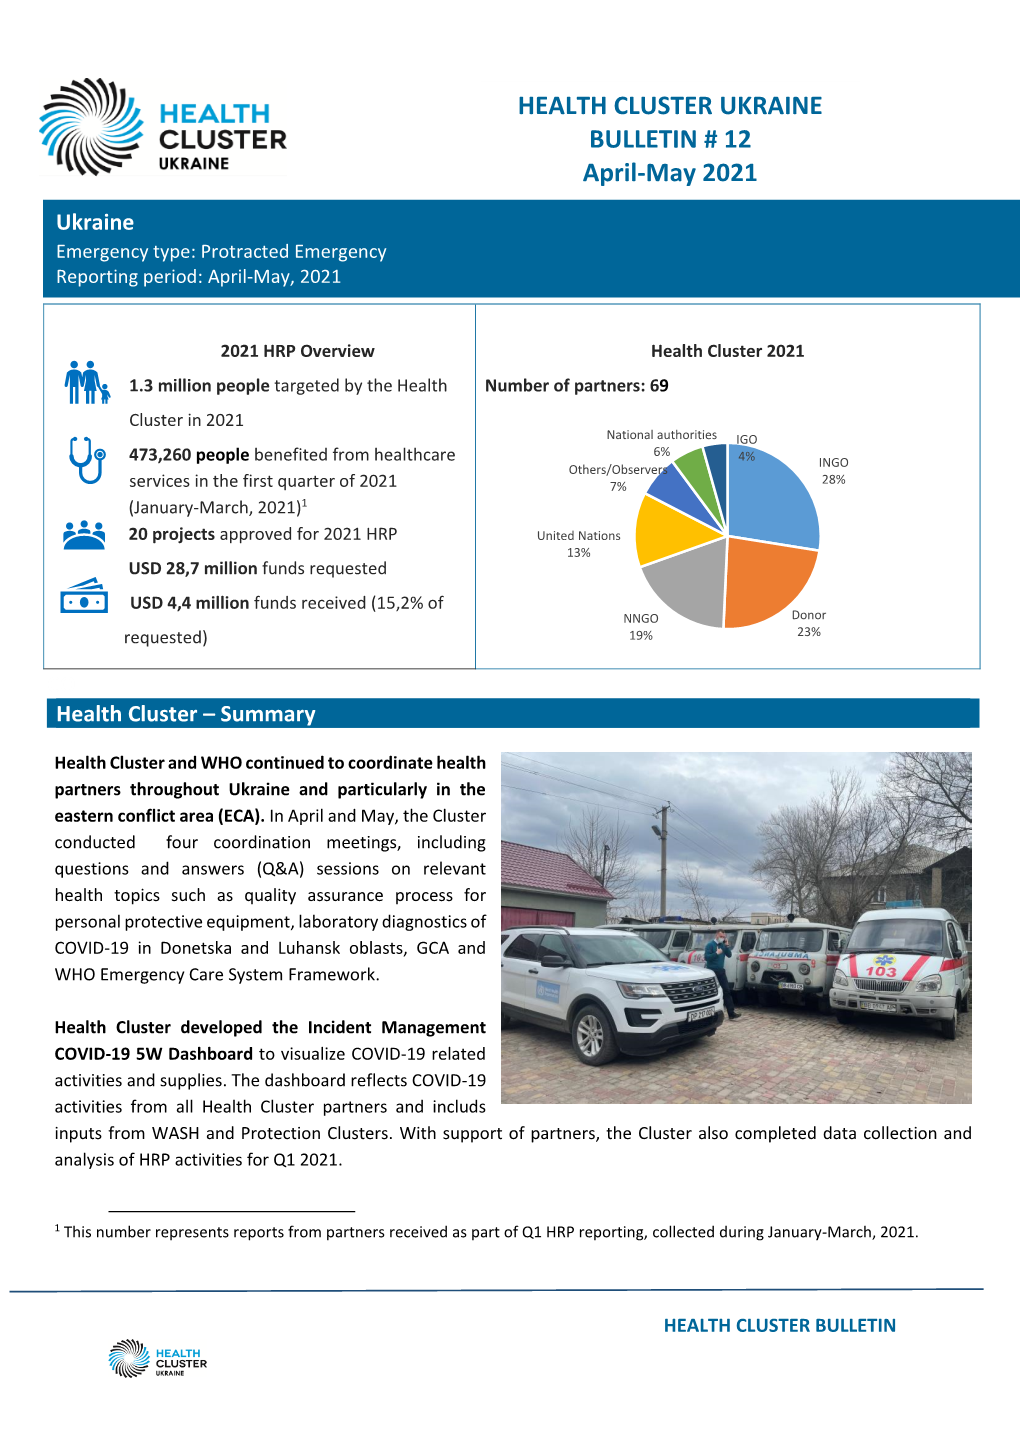 HEALTH CLUSTER UKRAINE BULLETIN # 12 April-May 2021 Ukraine Emergency Type: Protracted Emergency Reporting Period: April-May, 2021